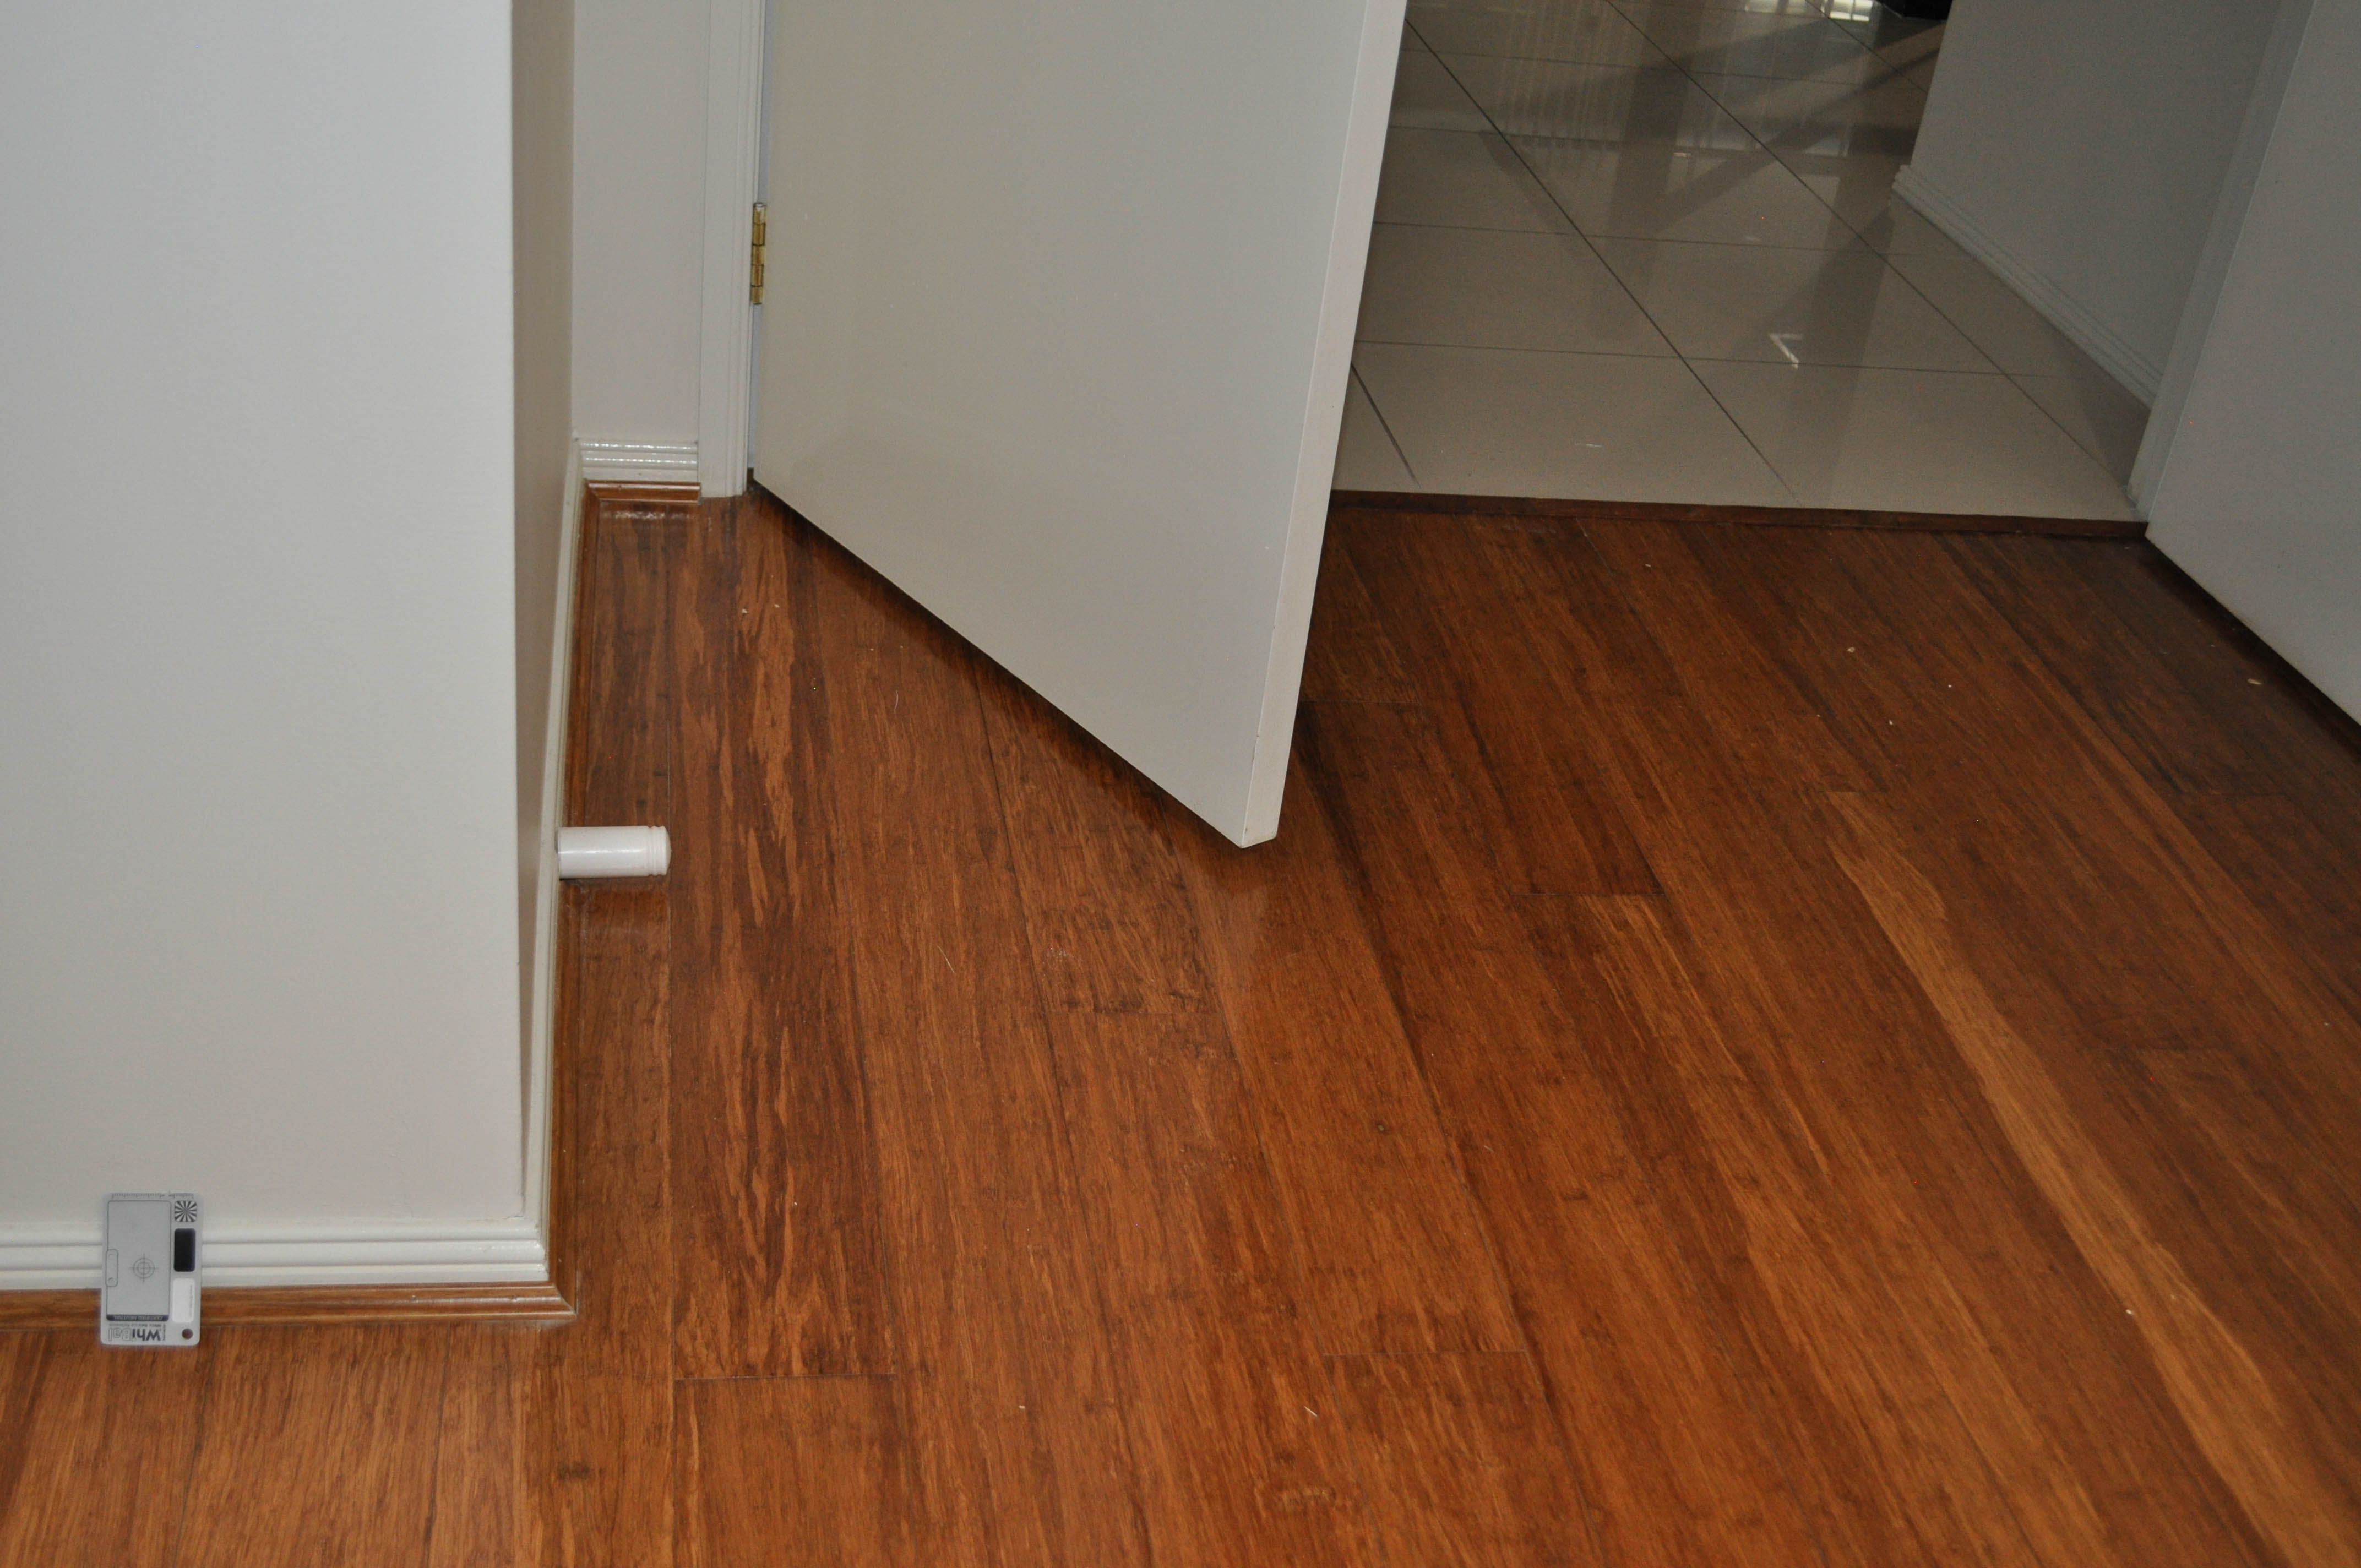 bamboo flooring installed in a room where the room is empty with the door open.